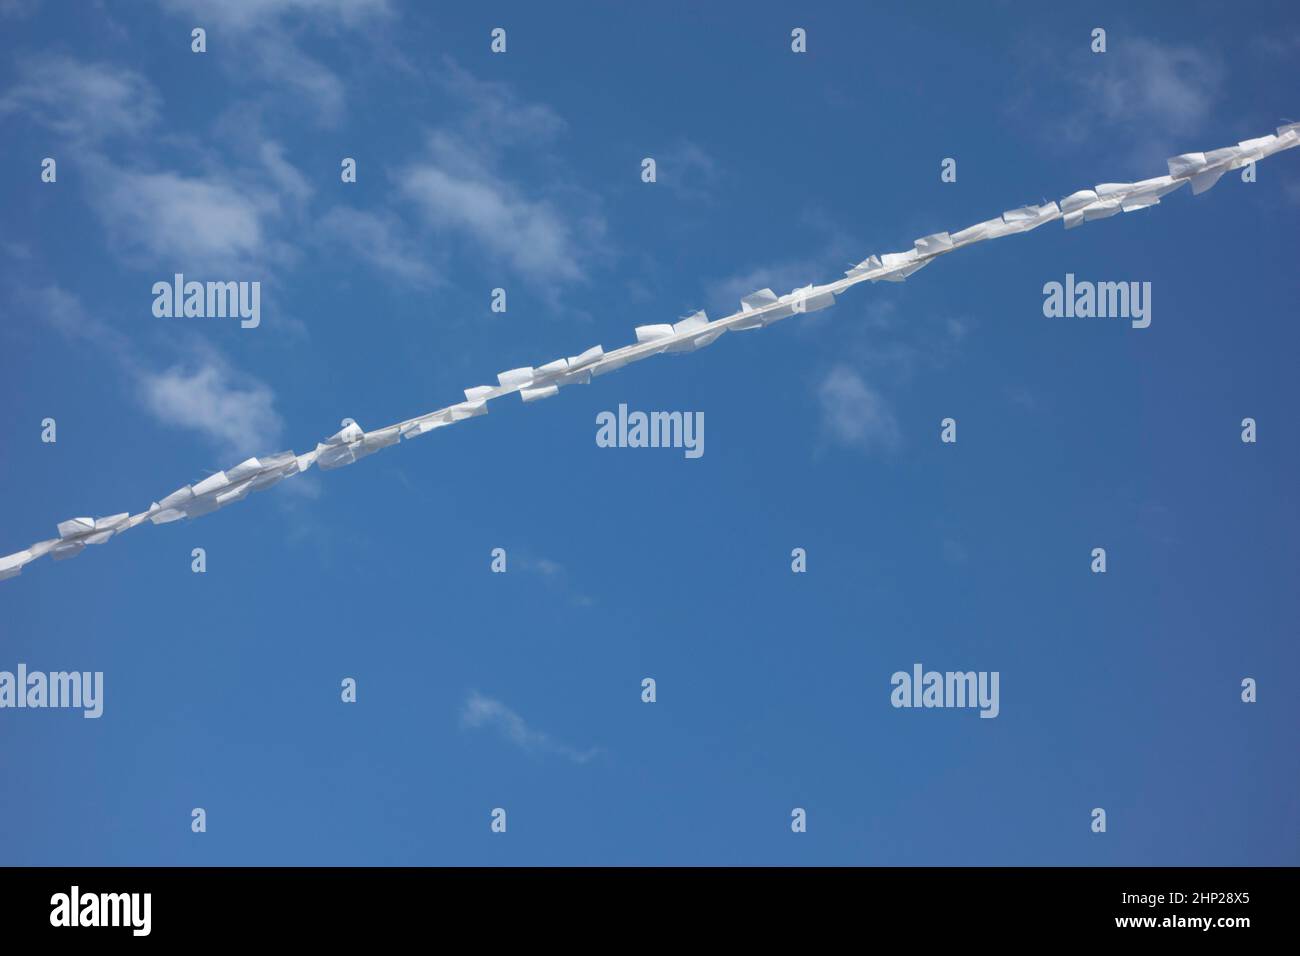 cloud formation in the sky, a weather phenomenon in meteorology Stock Photo